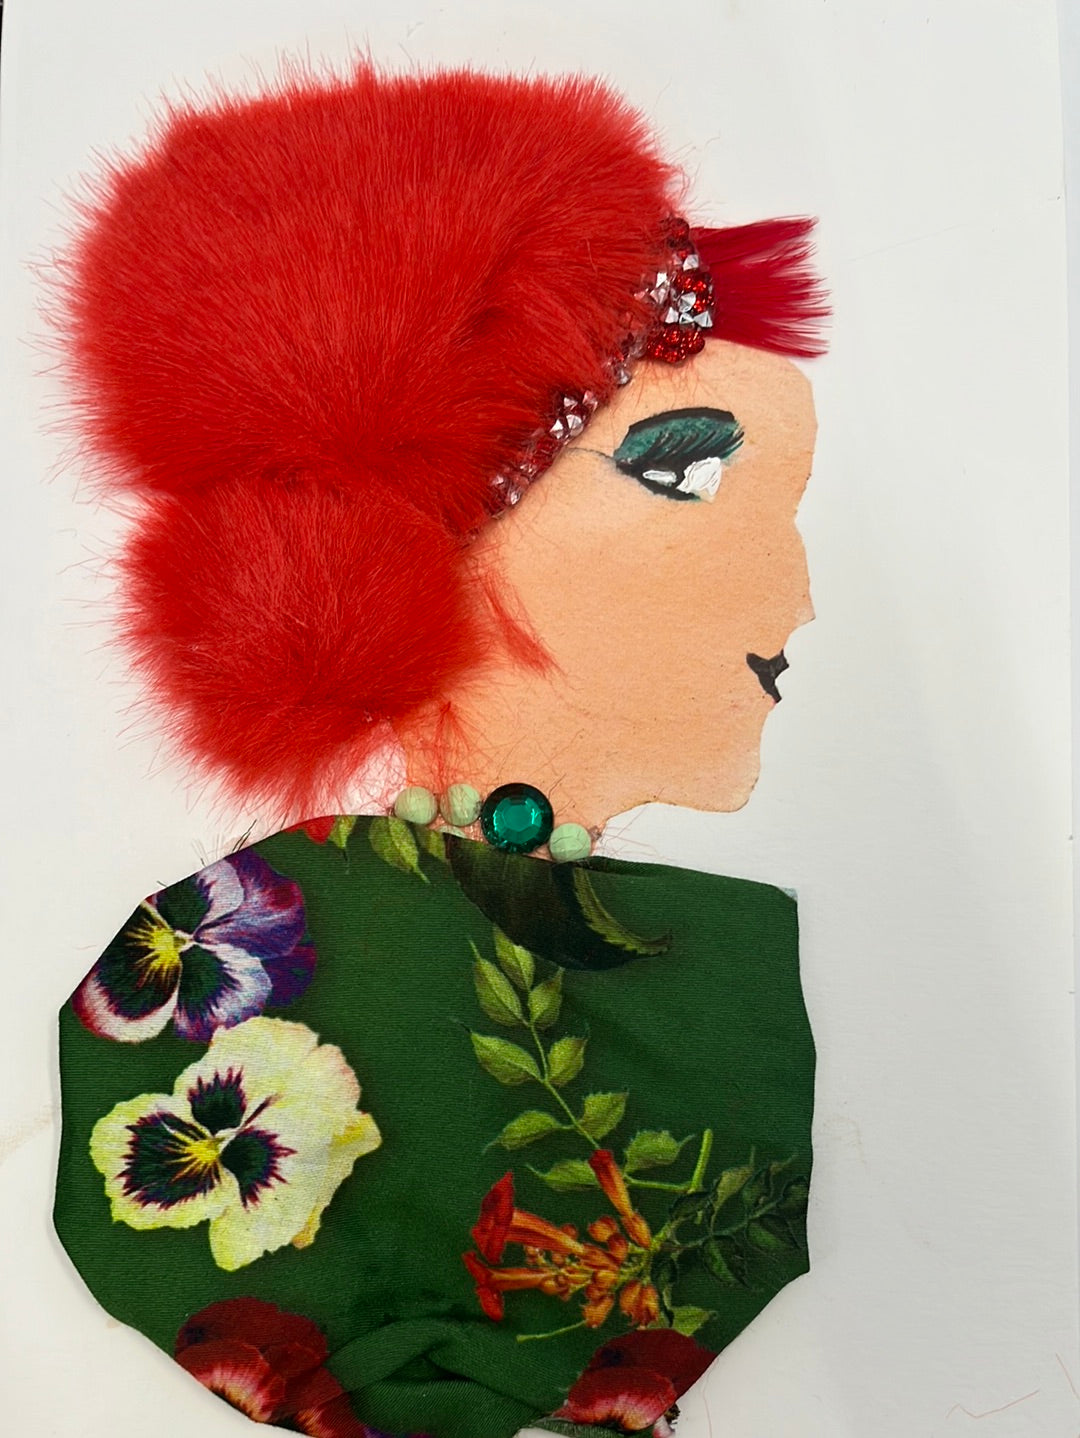 She wears a green floral dress which gives a festive look to her red furry hair. 